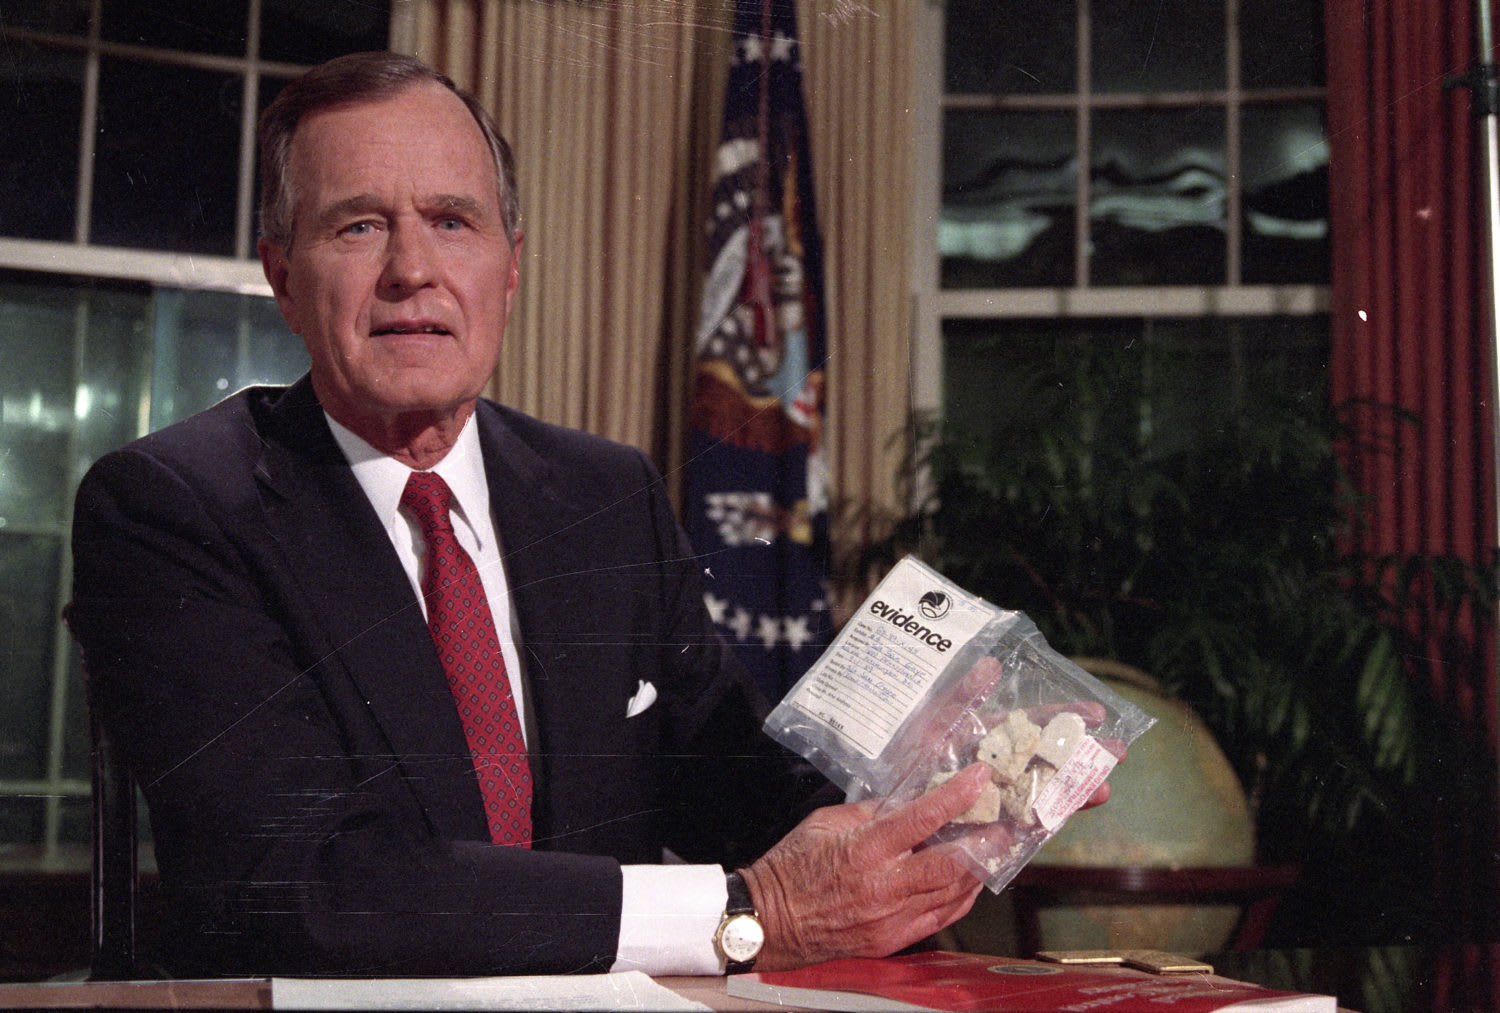 President George H. W. Bush holds up a bag of crack cocaine during a 1989 televised speech. Bush called drugs “the gravest domestic threat facing our nation.”